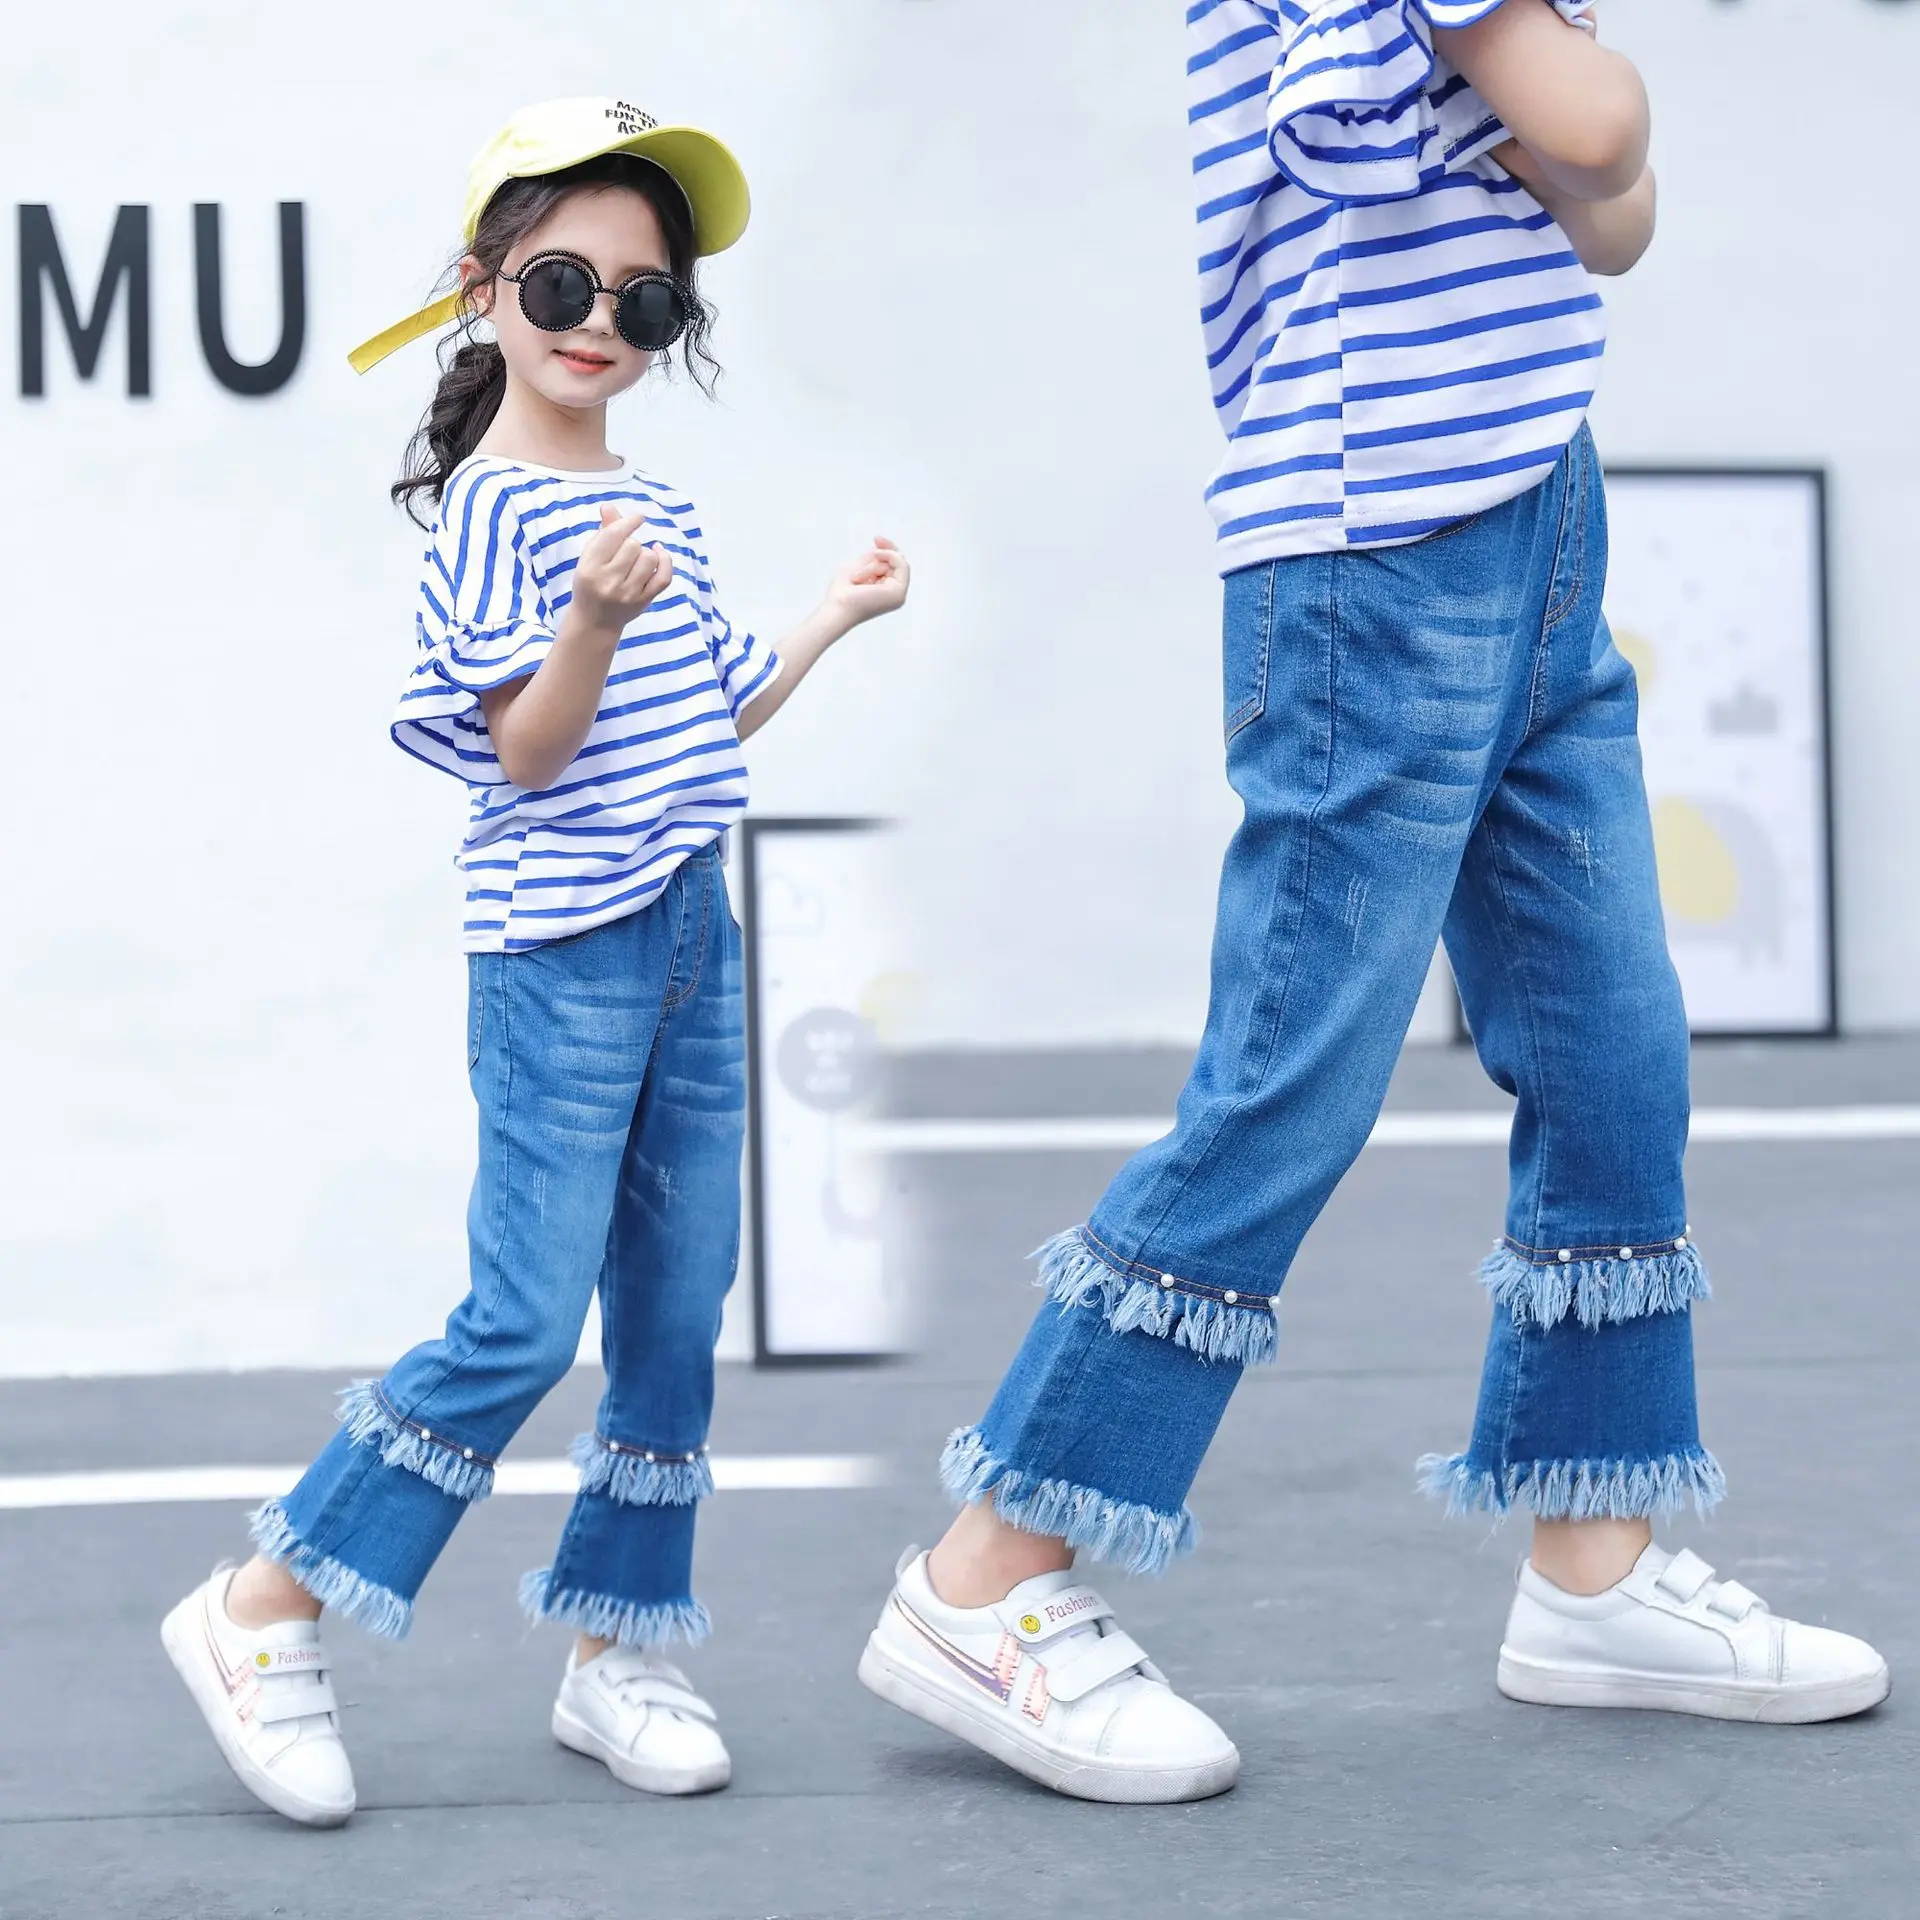 

2020 New Spring Autumn Item Girl Sports Jeans Pant Casual Denim Trousers with waistband with Beading and Tassel